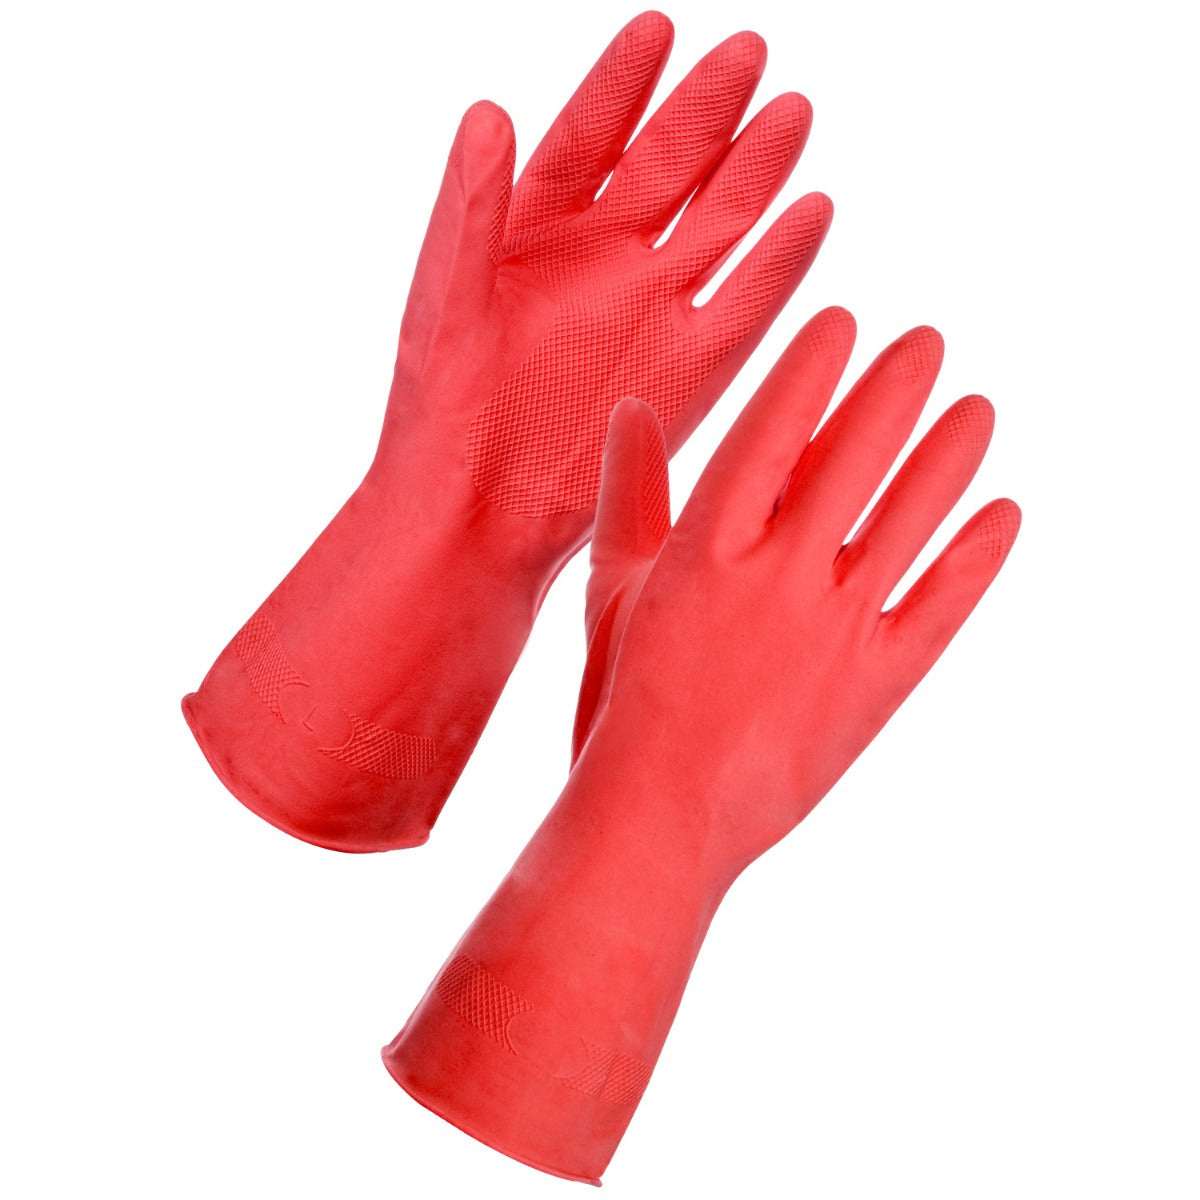 Purely Class Household Rubber Gloves Red Small x 1 Pair